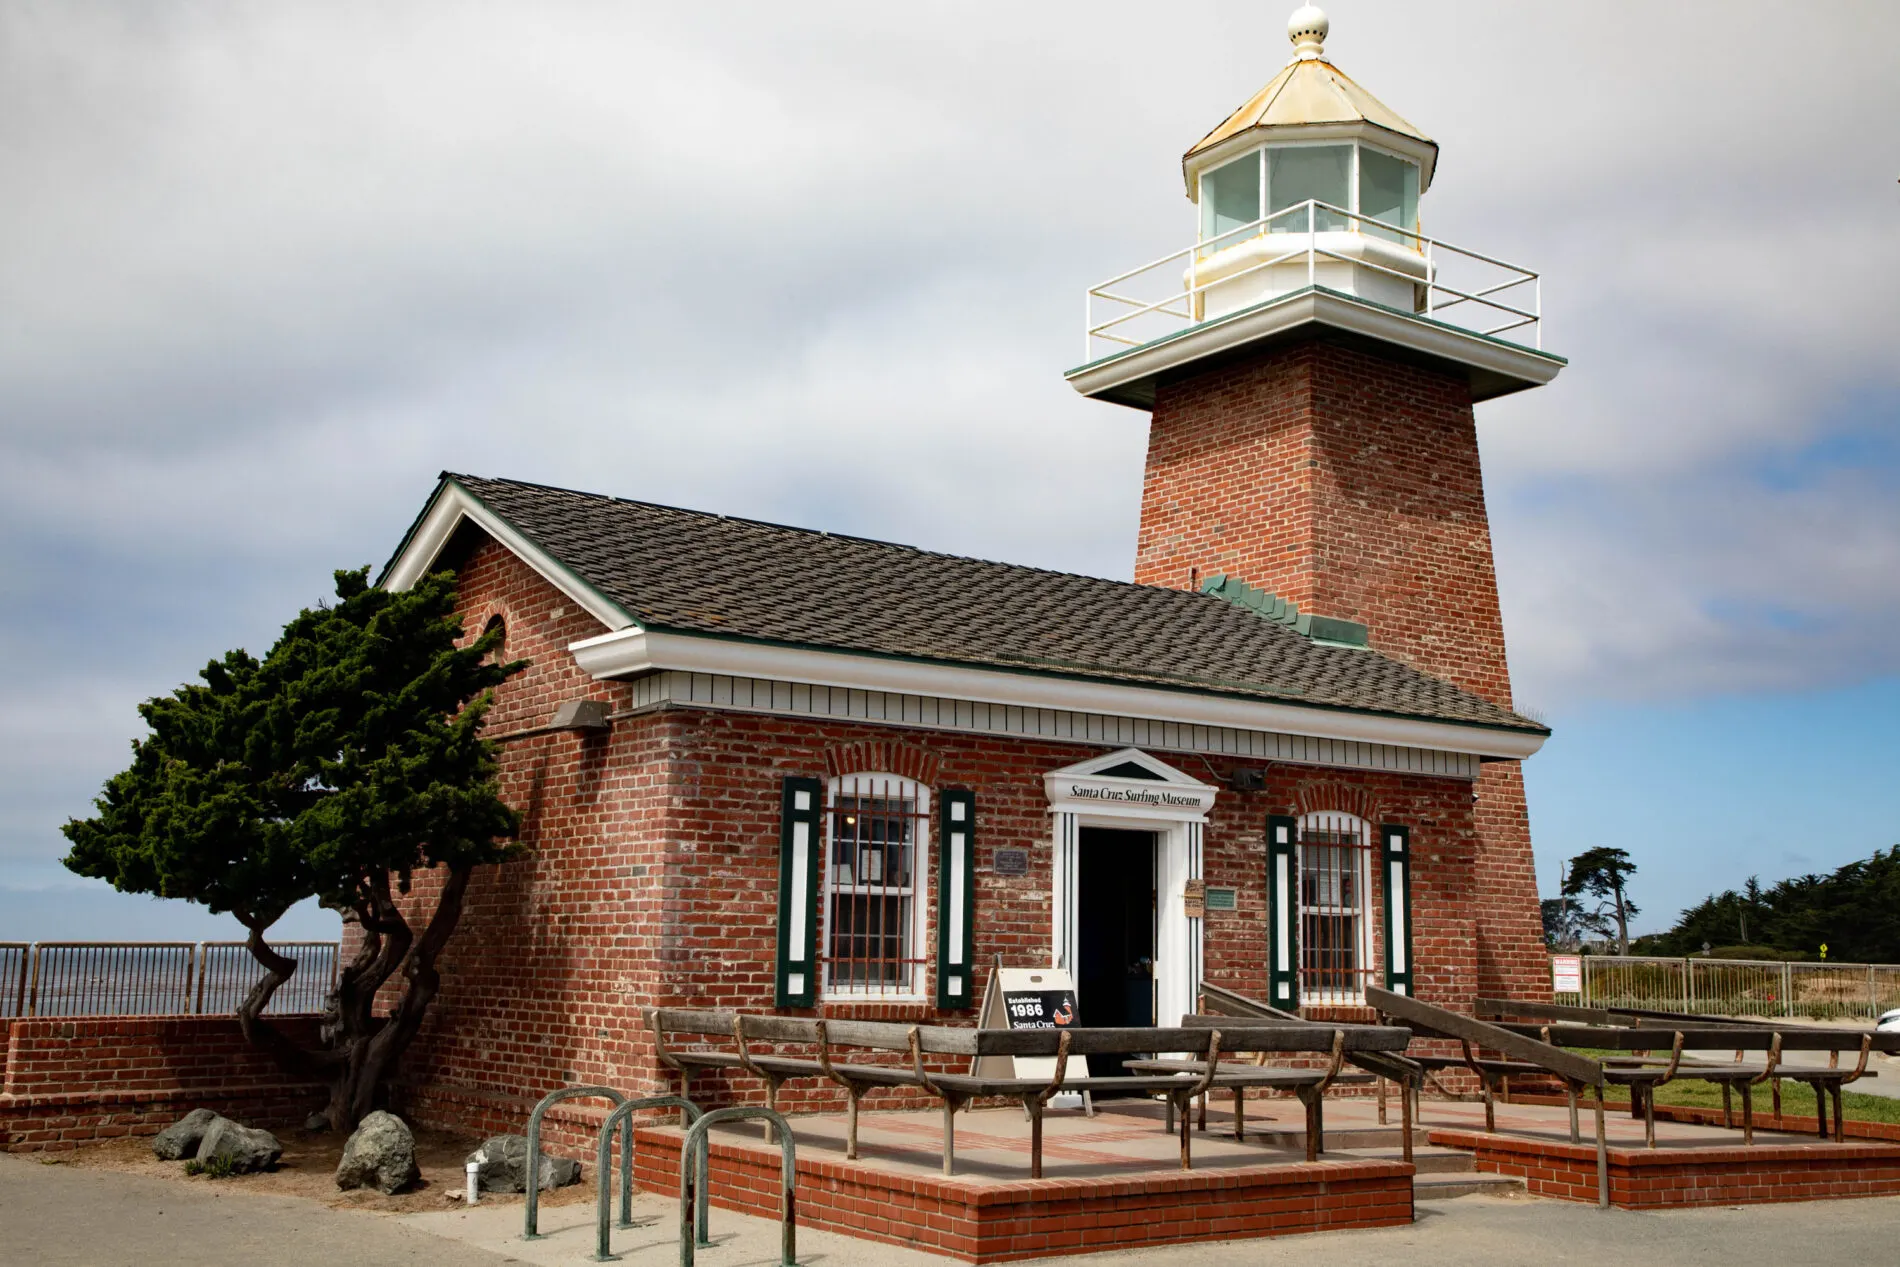 One of the best stops slong the Pacific Coast Highway is the Santa Cruz Surfing Museum.